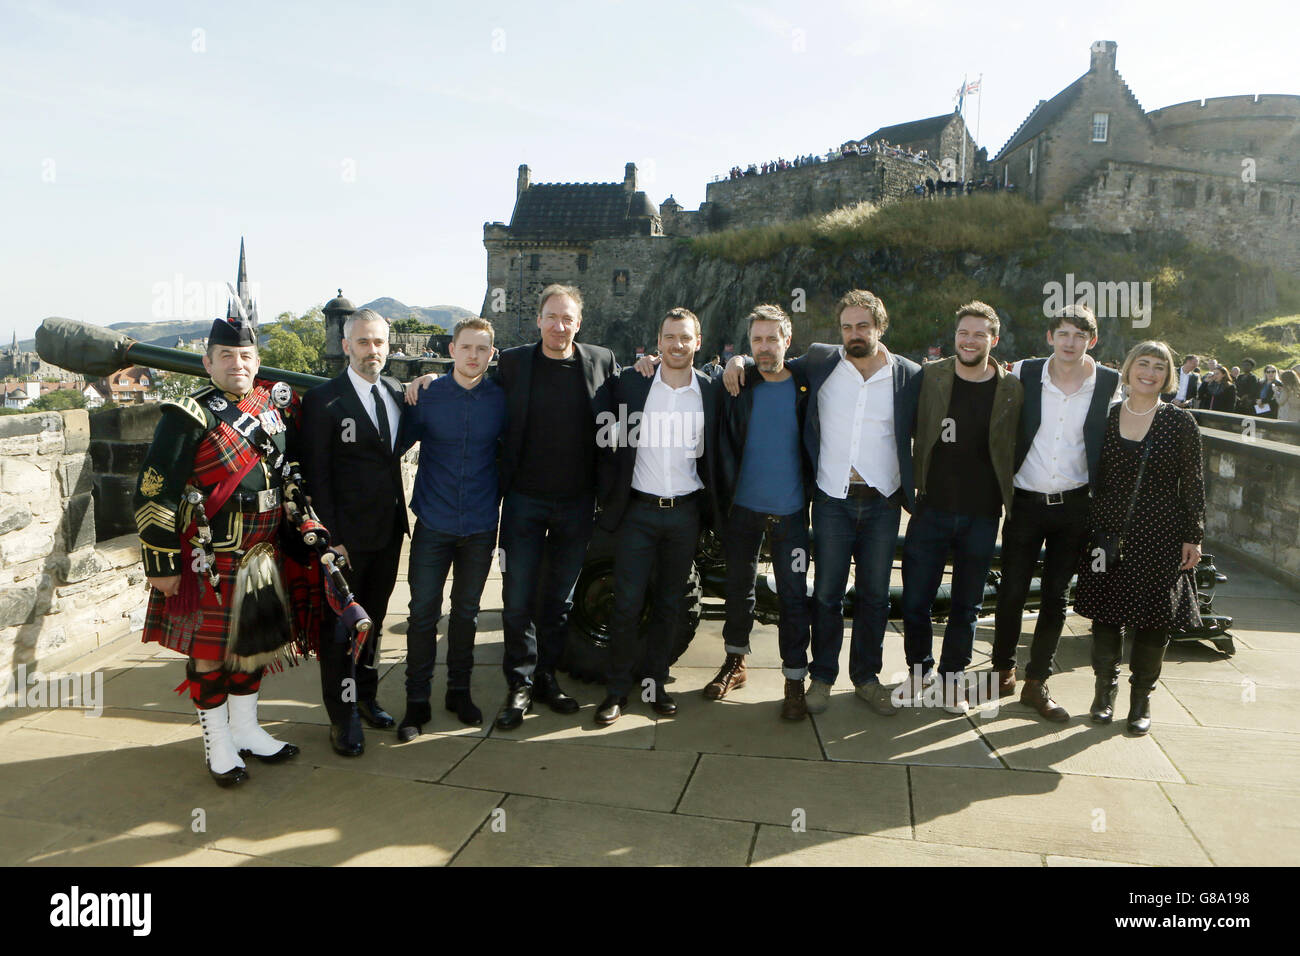 Piper Major Darren Walker with Macbeth stars (left to right) Iain Canning, Ross Anderson, David Thewlis, Michael Fassbender, Paddy Considine, Director Justin Kurzel, Jack Reynor, James Harknes and Laura Smith during a photocall at Edinburgh Castle in Scotland. Stock Photo